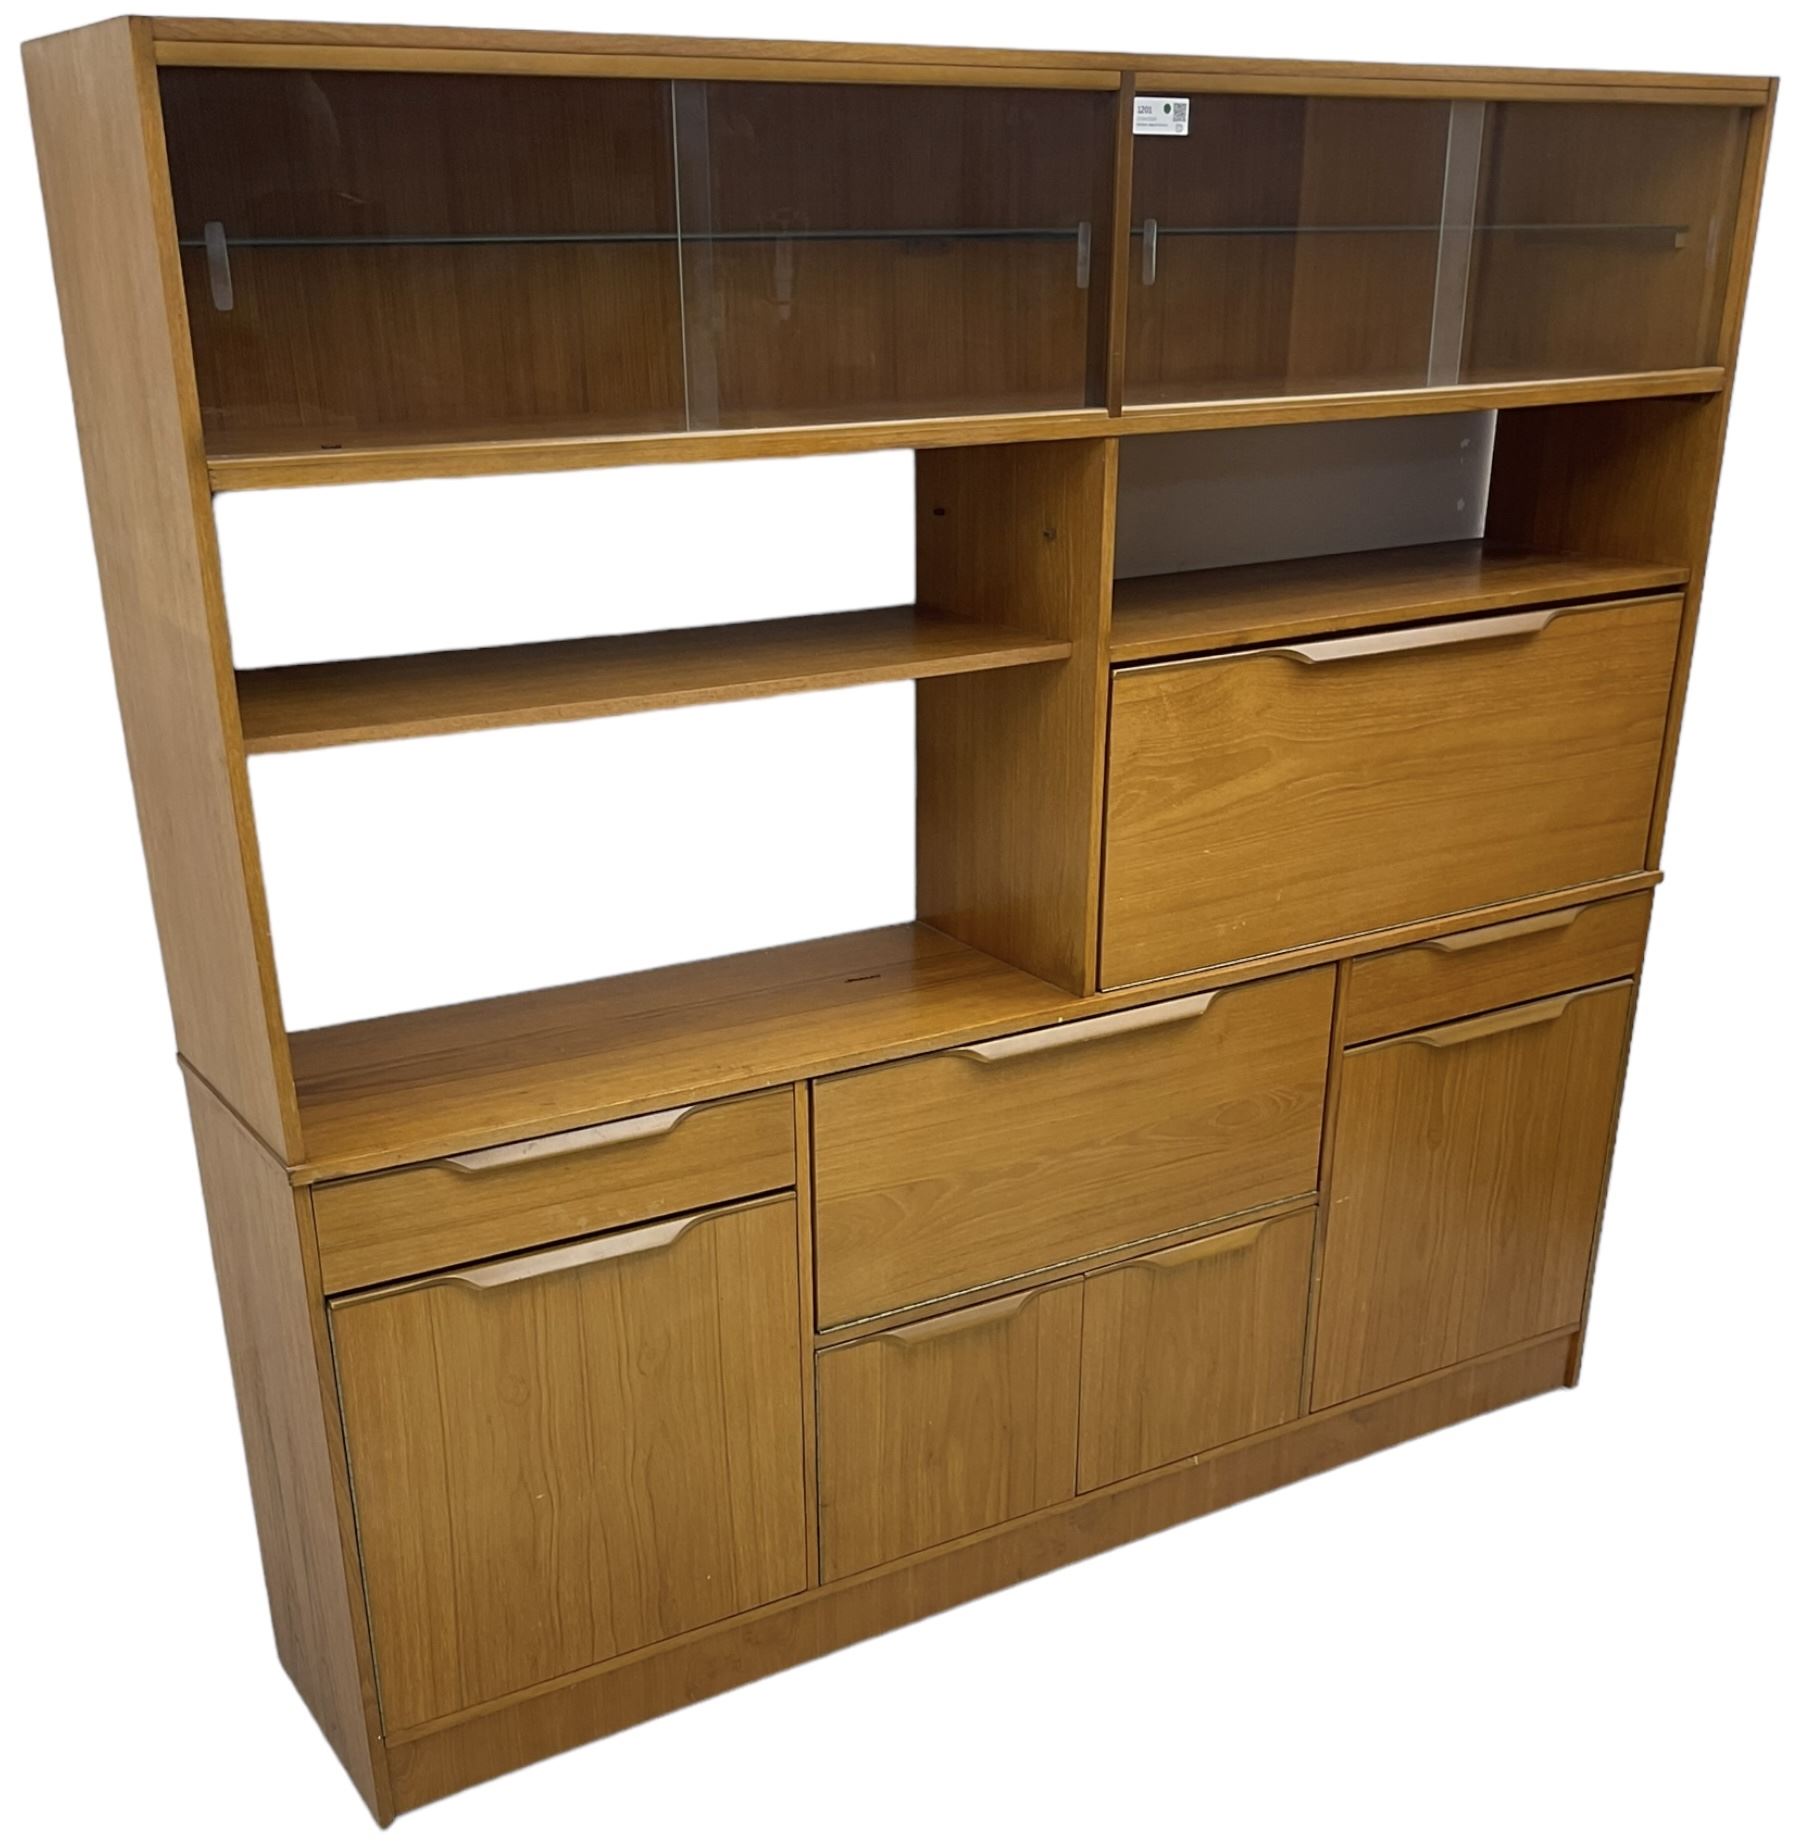 Mid-20th century teak sectional wall unit - Image 3 of 6